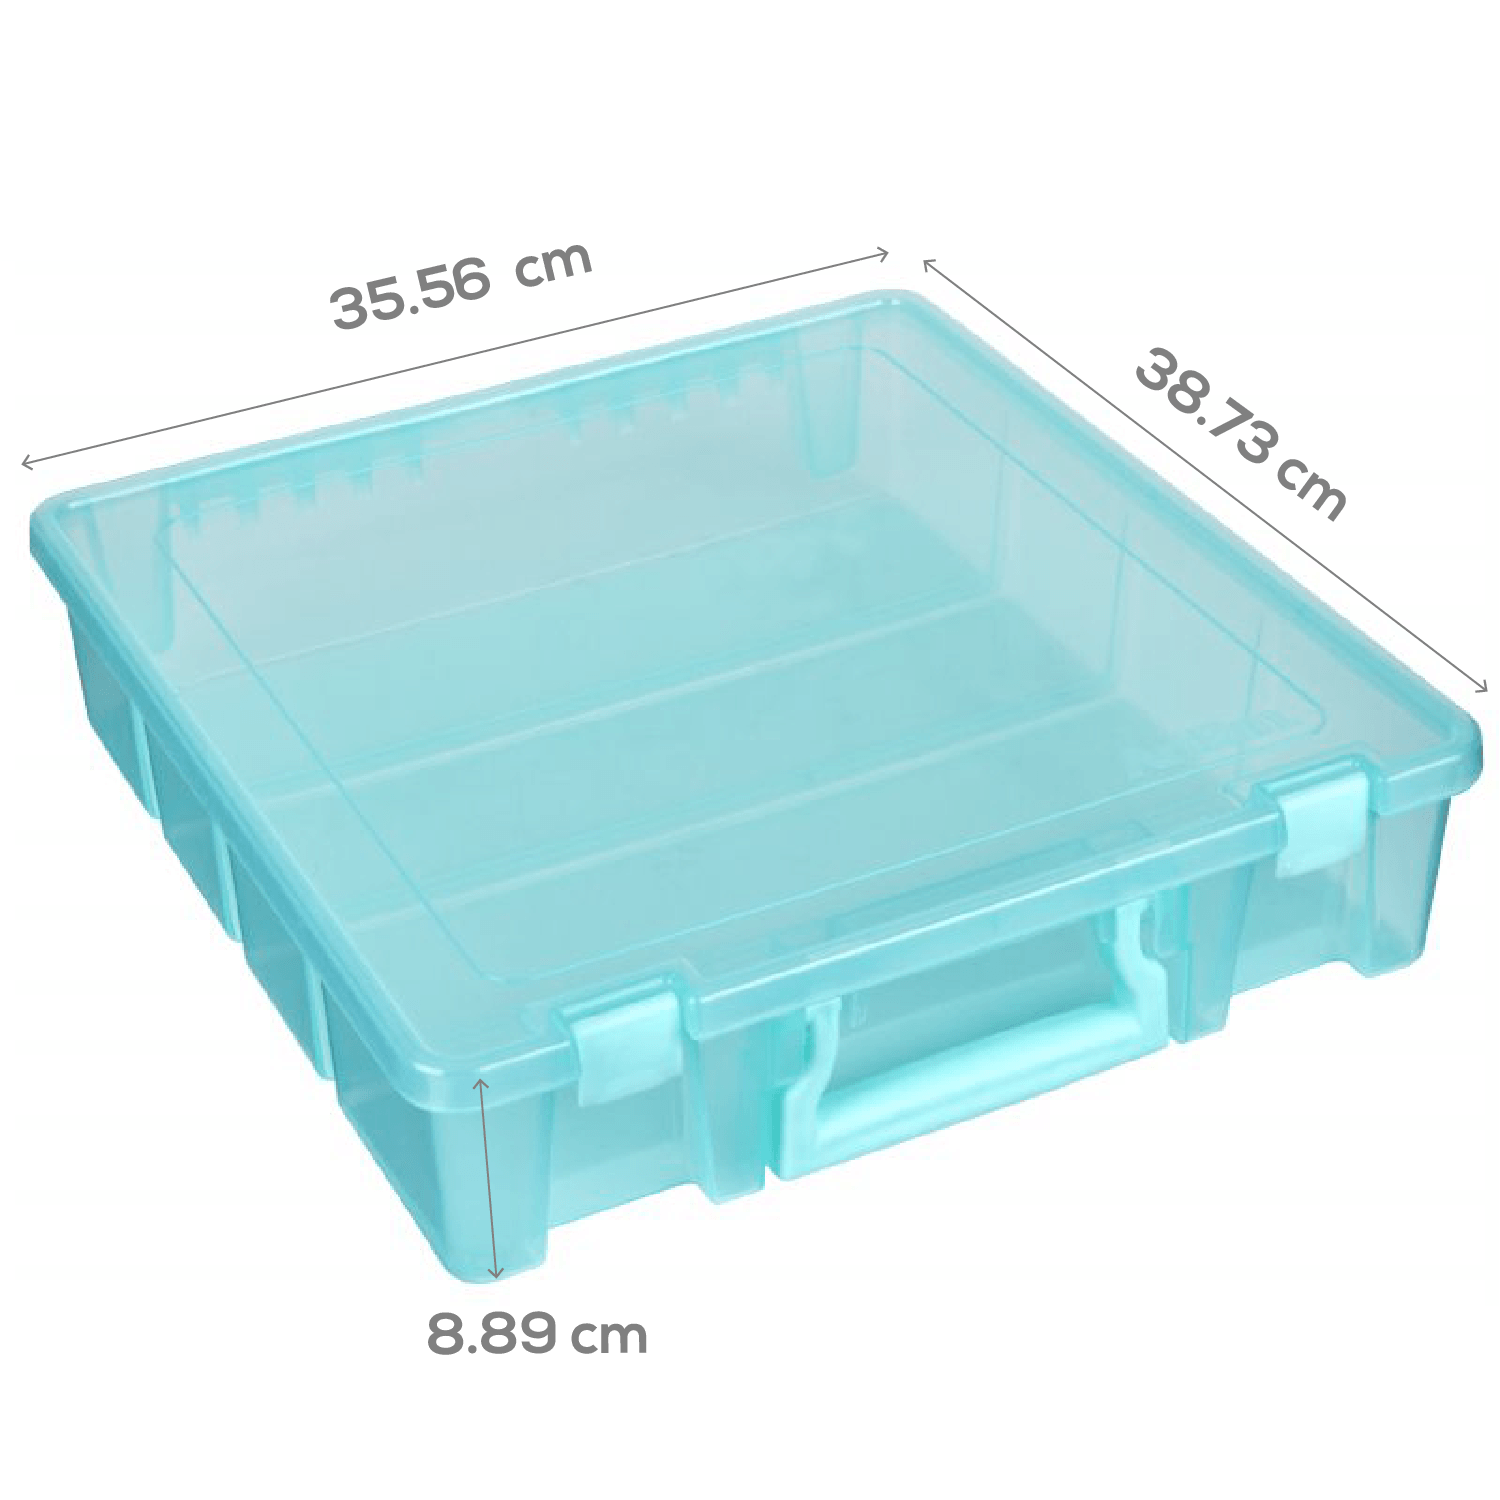 ARTBIN SUPER SATCHEL STORAGE BOX for craft is stackable with 6 compartments